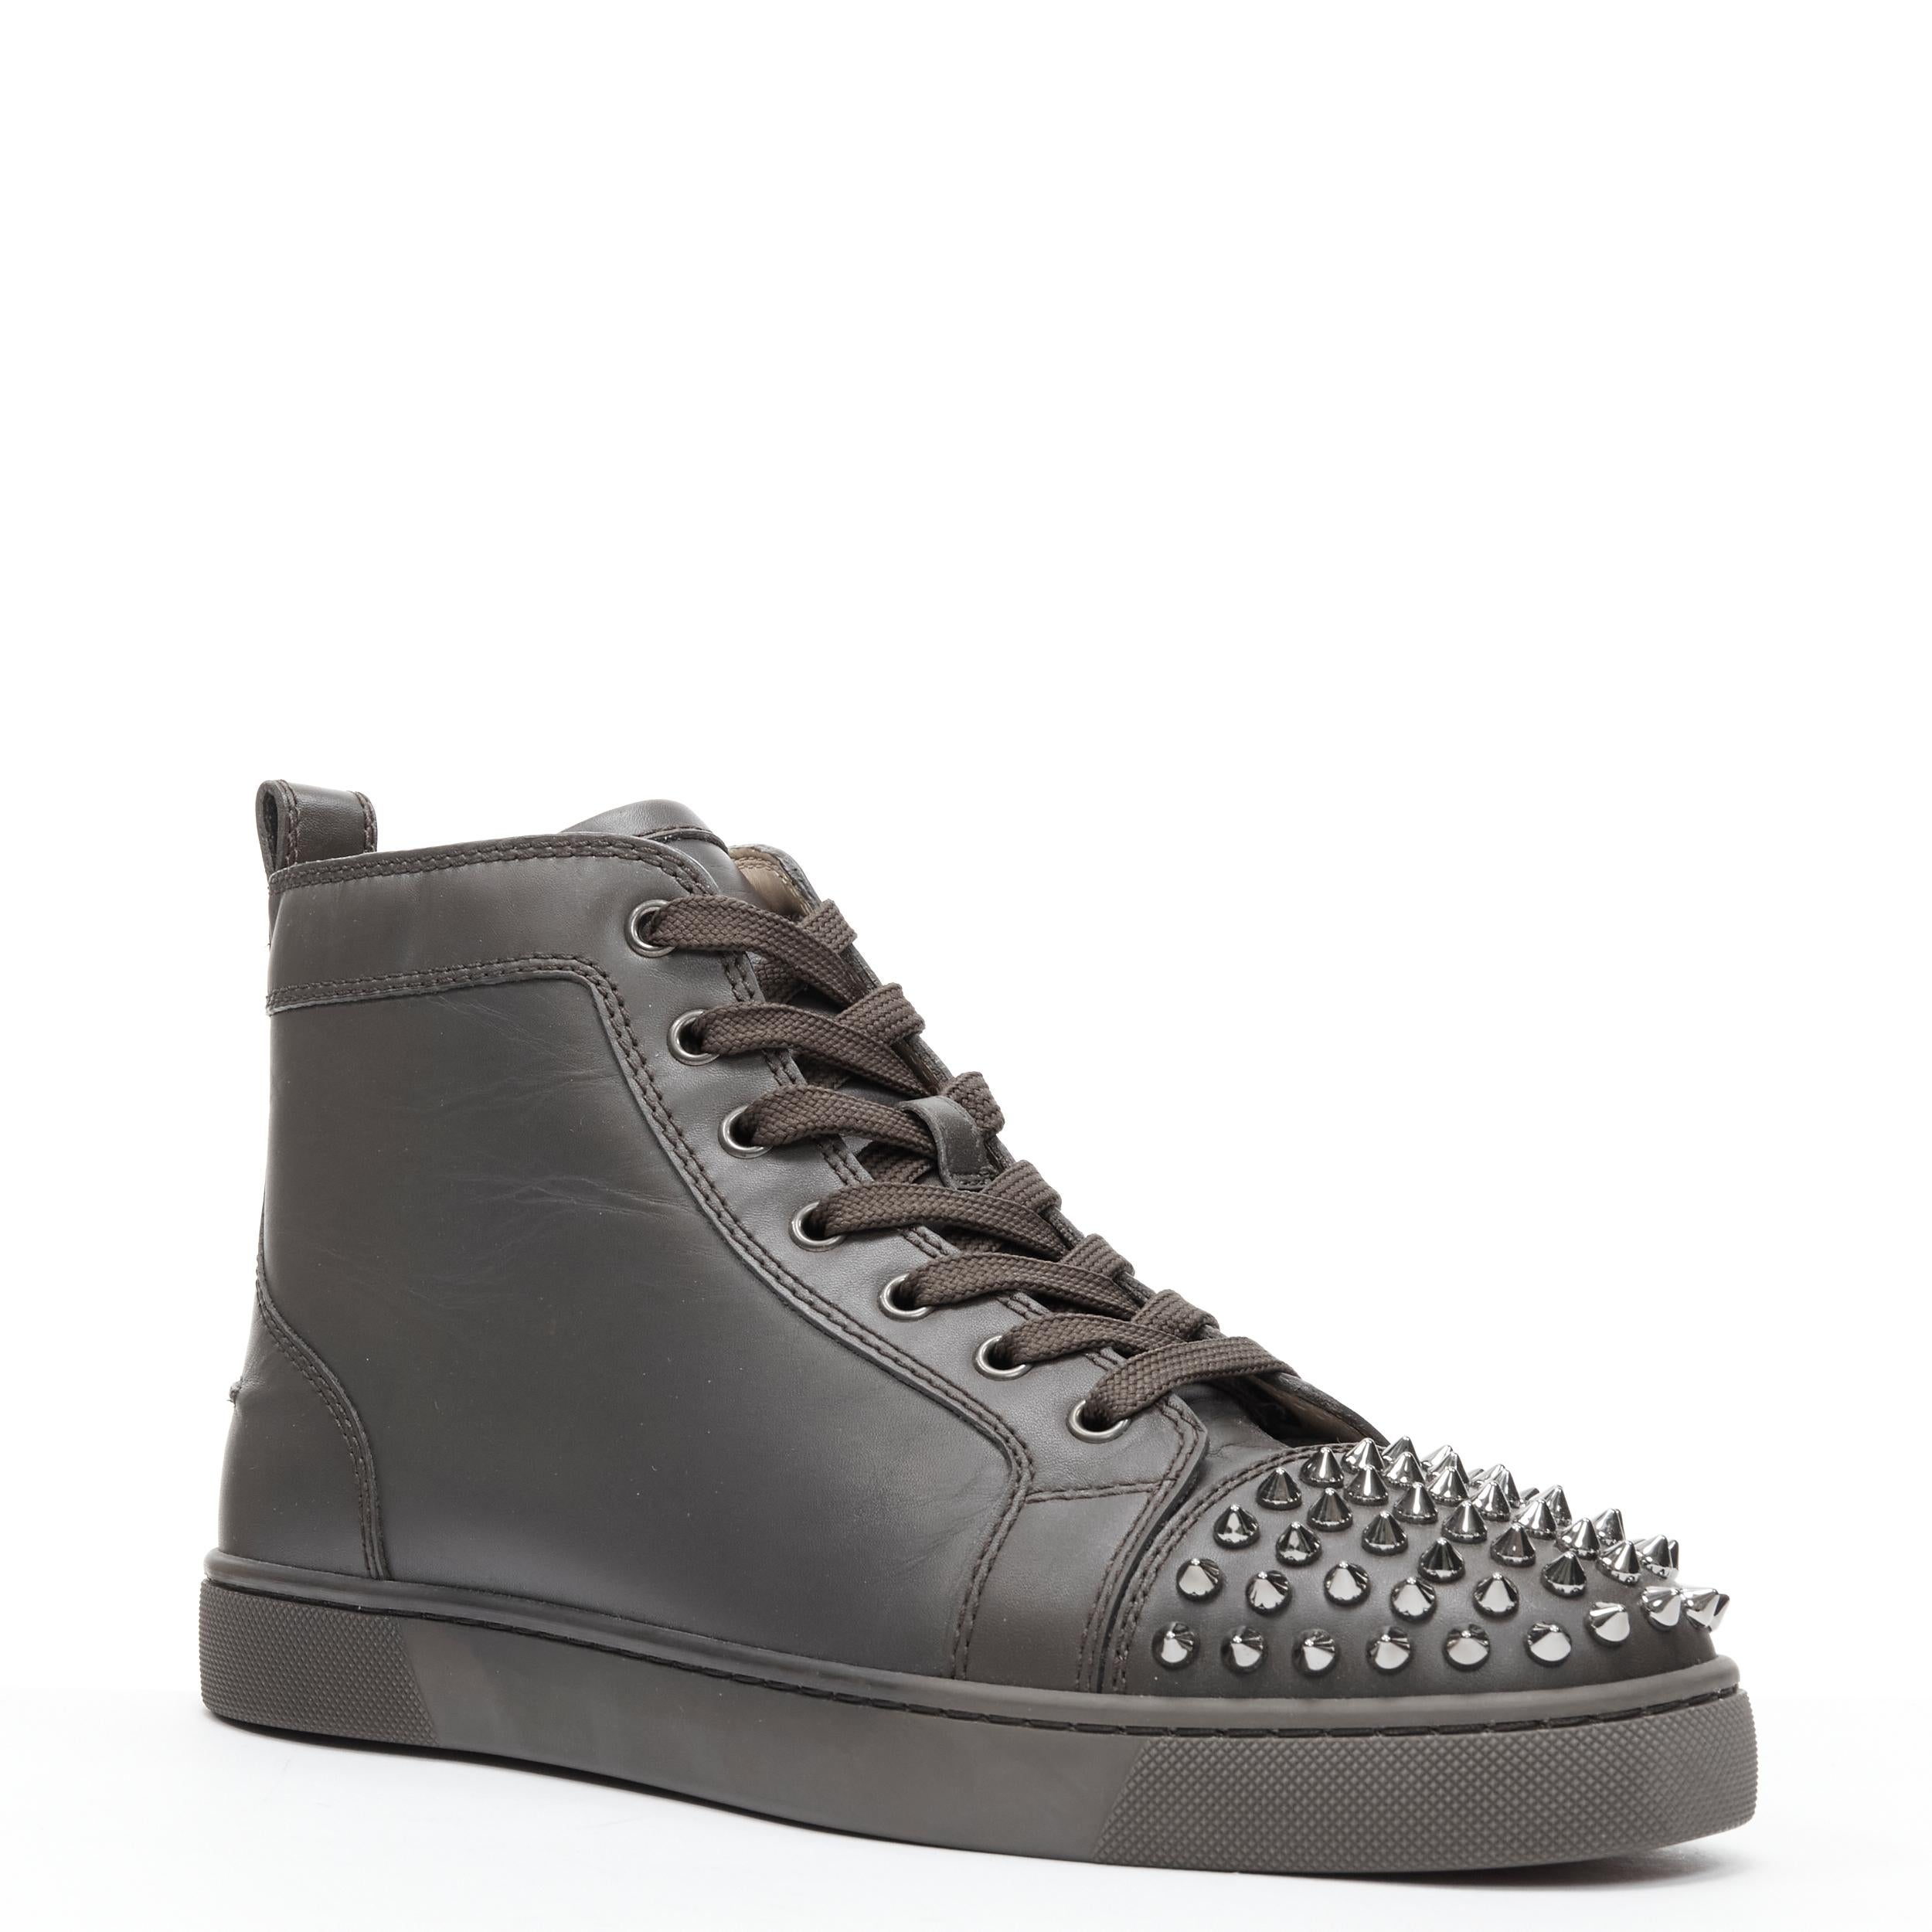 CHRISTIAN LOUBOUTIN Lou Spikes Orlatno brown studded toe high top sneaker EU40 
Reference: TGAS/B02091 
Brand: Christian Louboutin 
Designer: Christian Louboutin 
Model: Lou Spike Orlato 
Material: Leather 
Color: Brown 
Pattern: Solid 
Extra